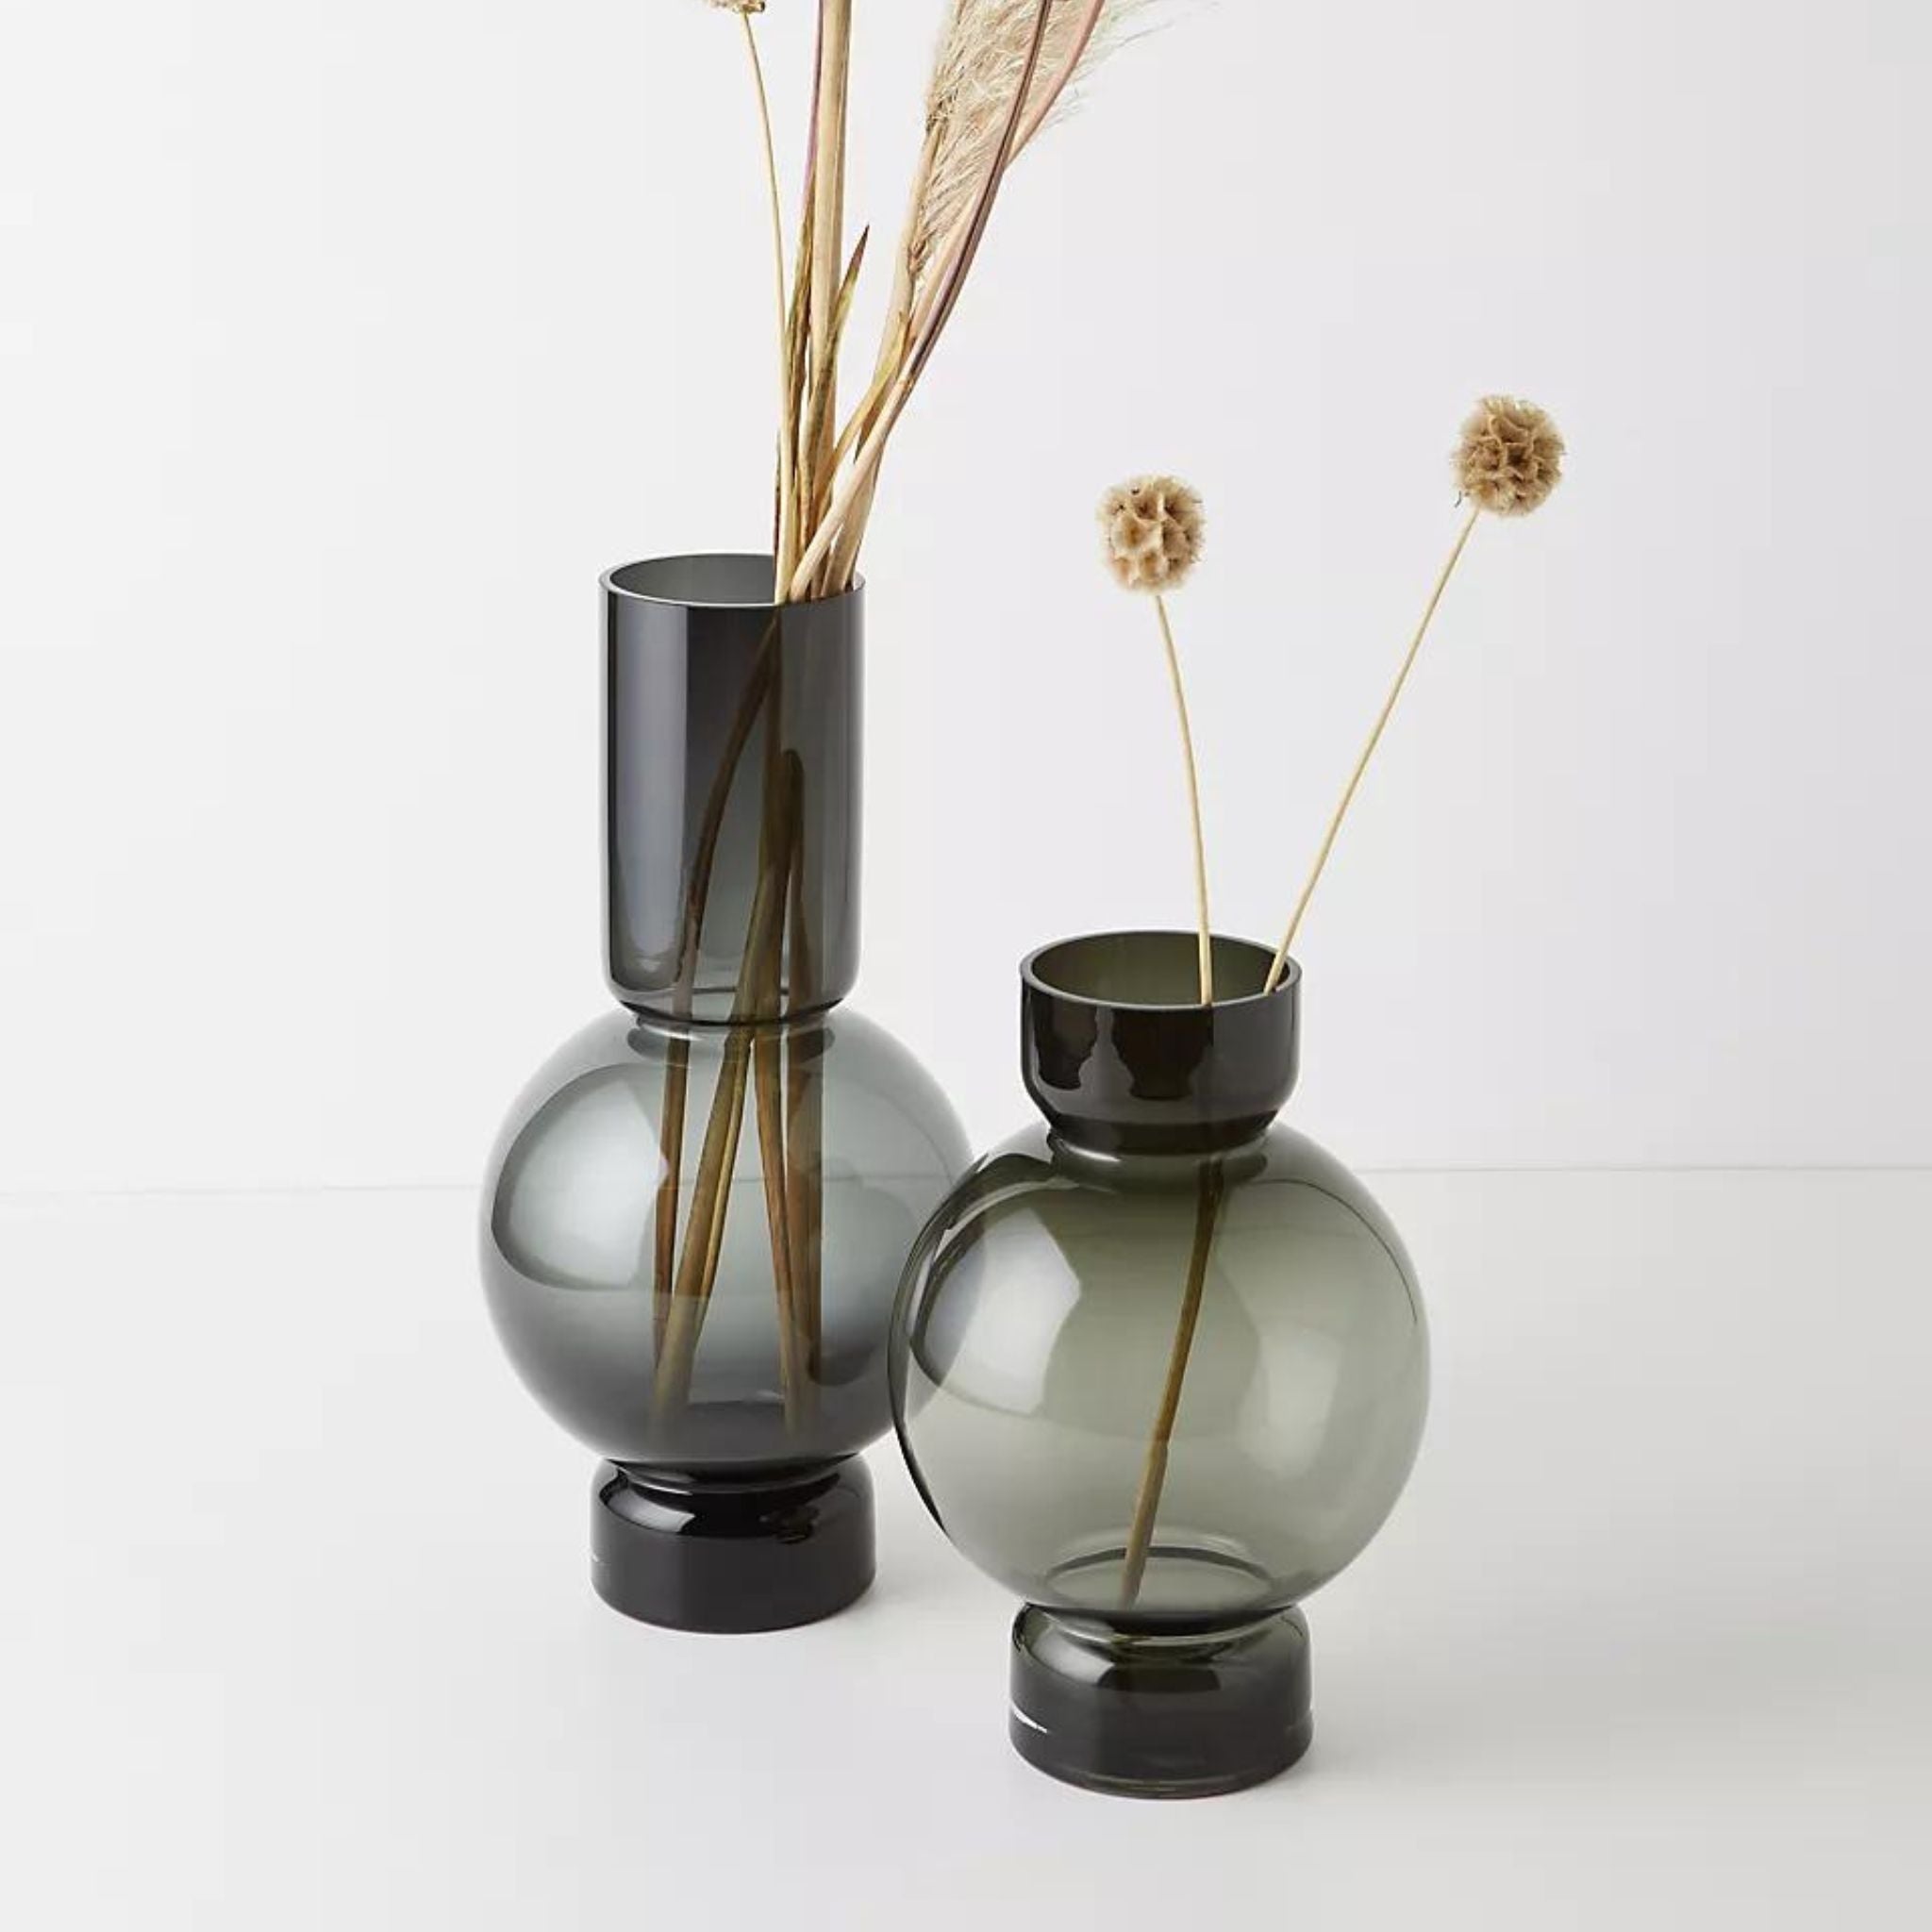 BUBBLE GREY VASE - Simply Elevated Home Furnishings 